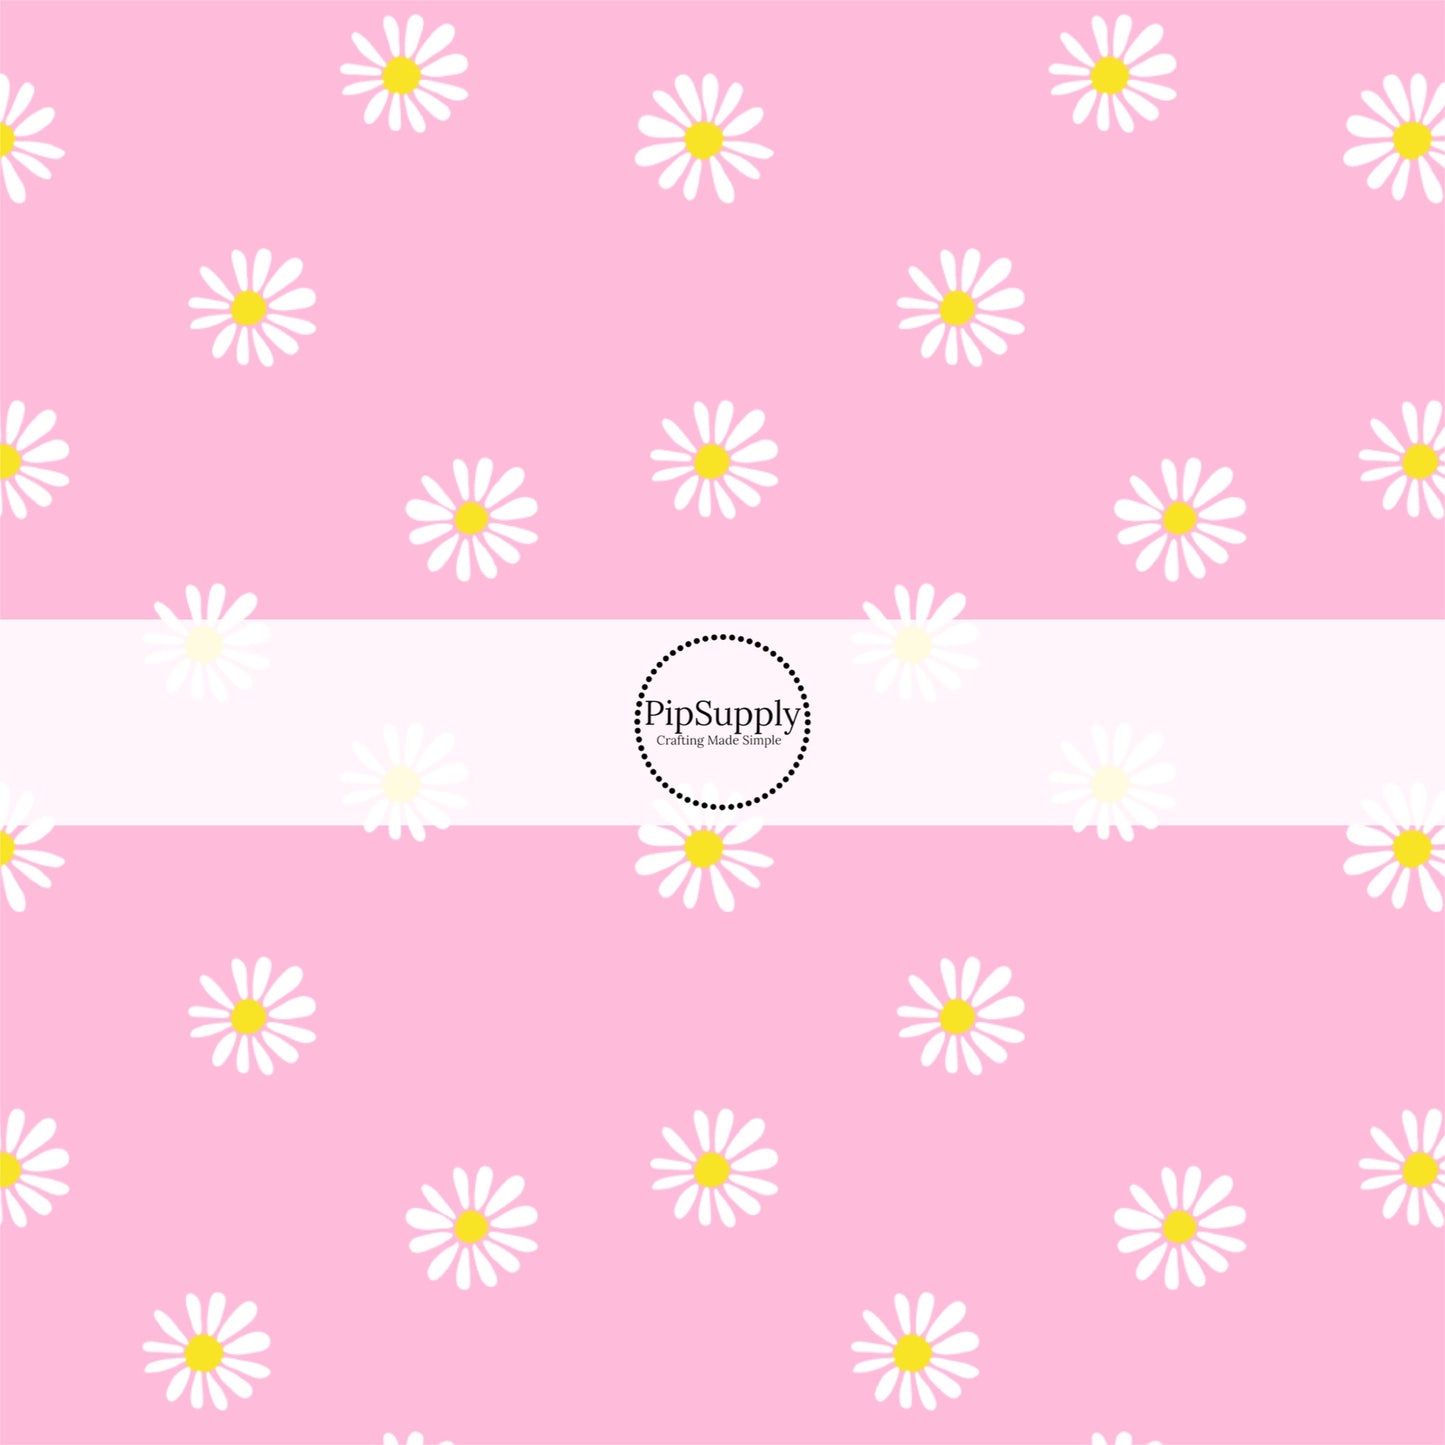 Bubble Pink Fabric by the Yard with a White Daisy Print and yellow centers. Spring Fabric - Floral Easter Fabric.